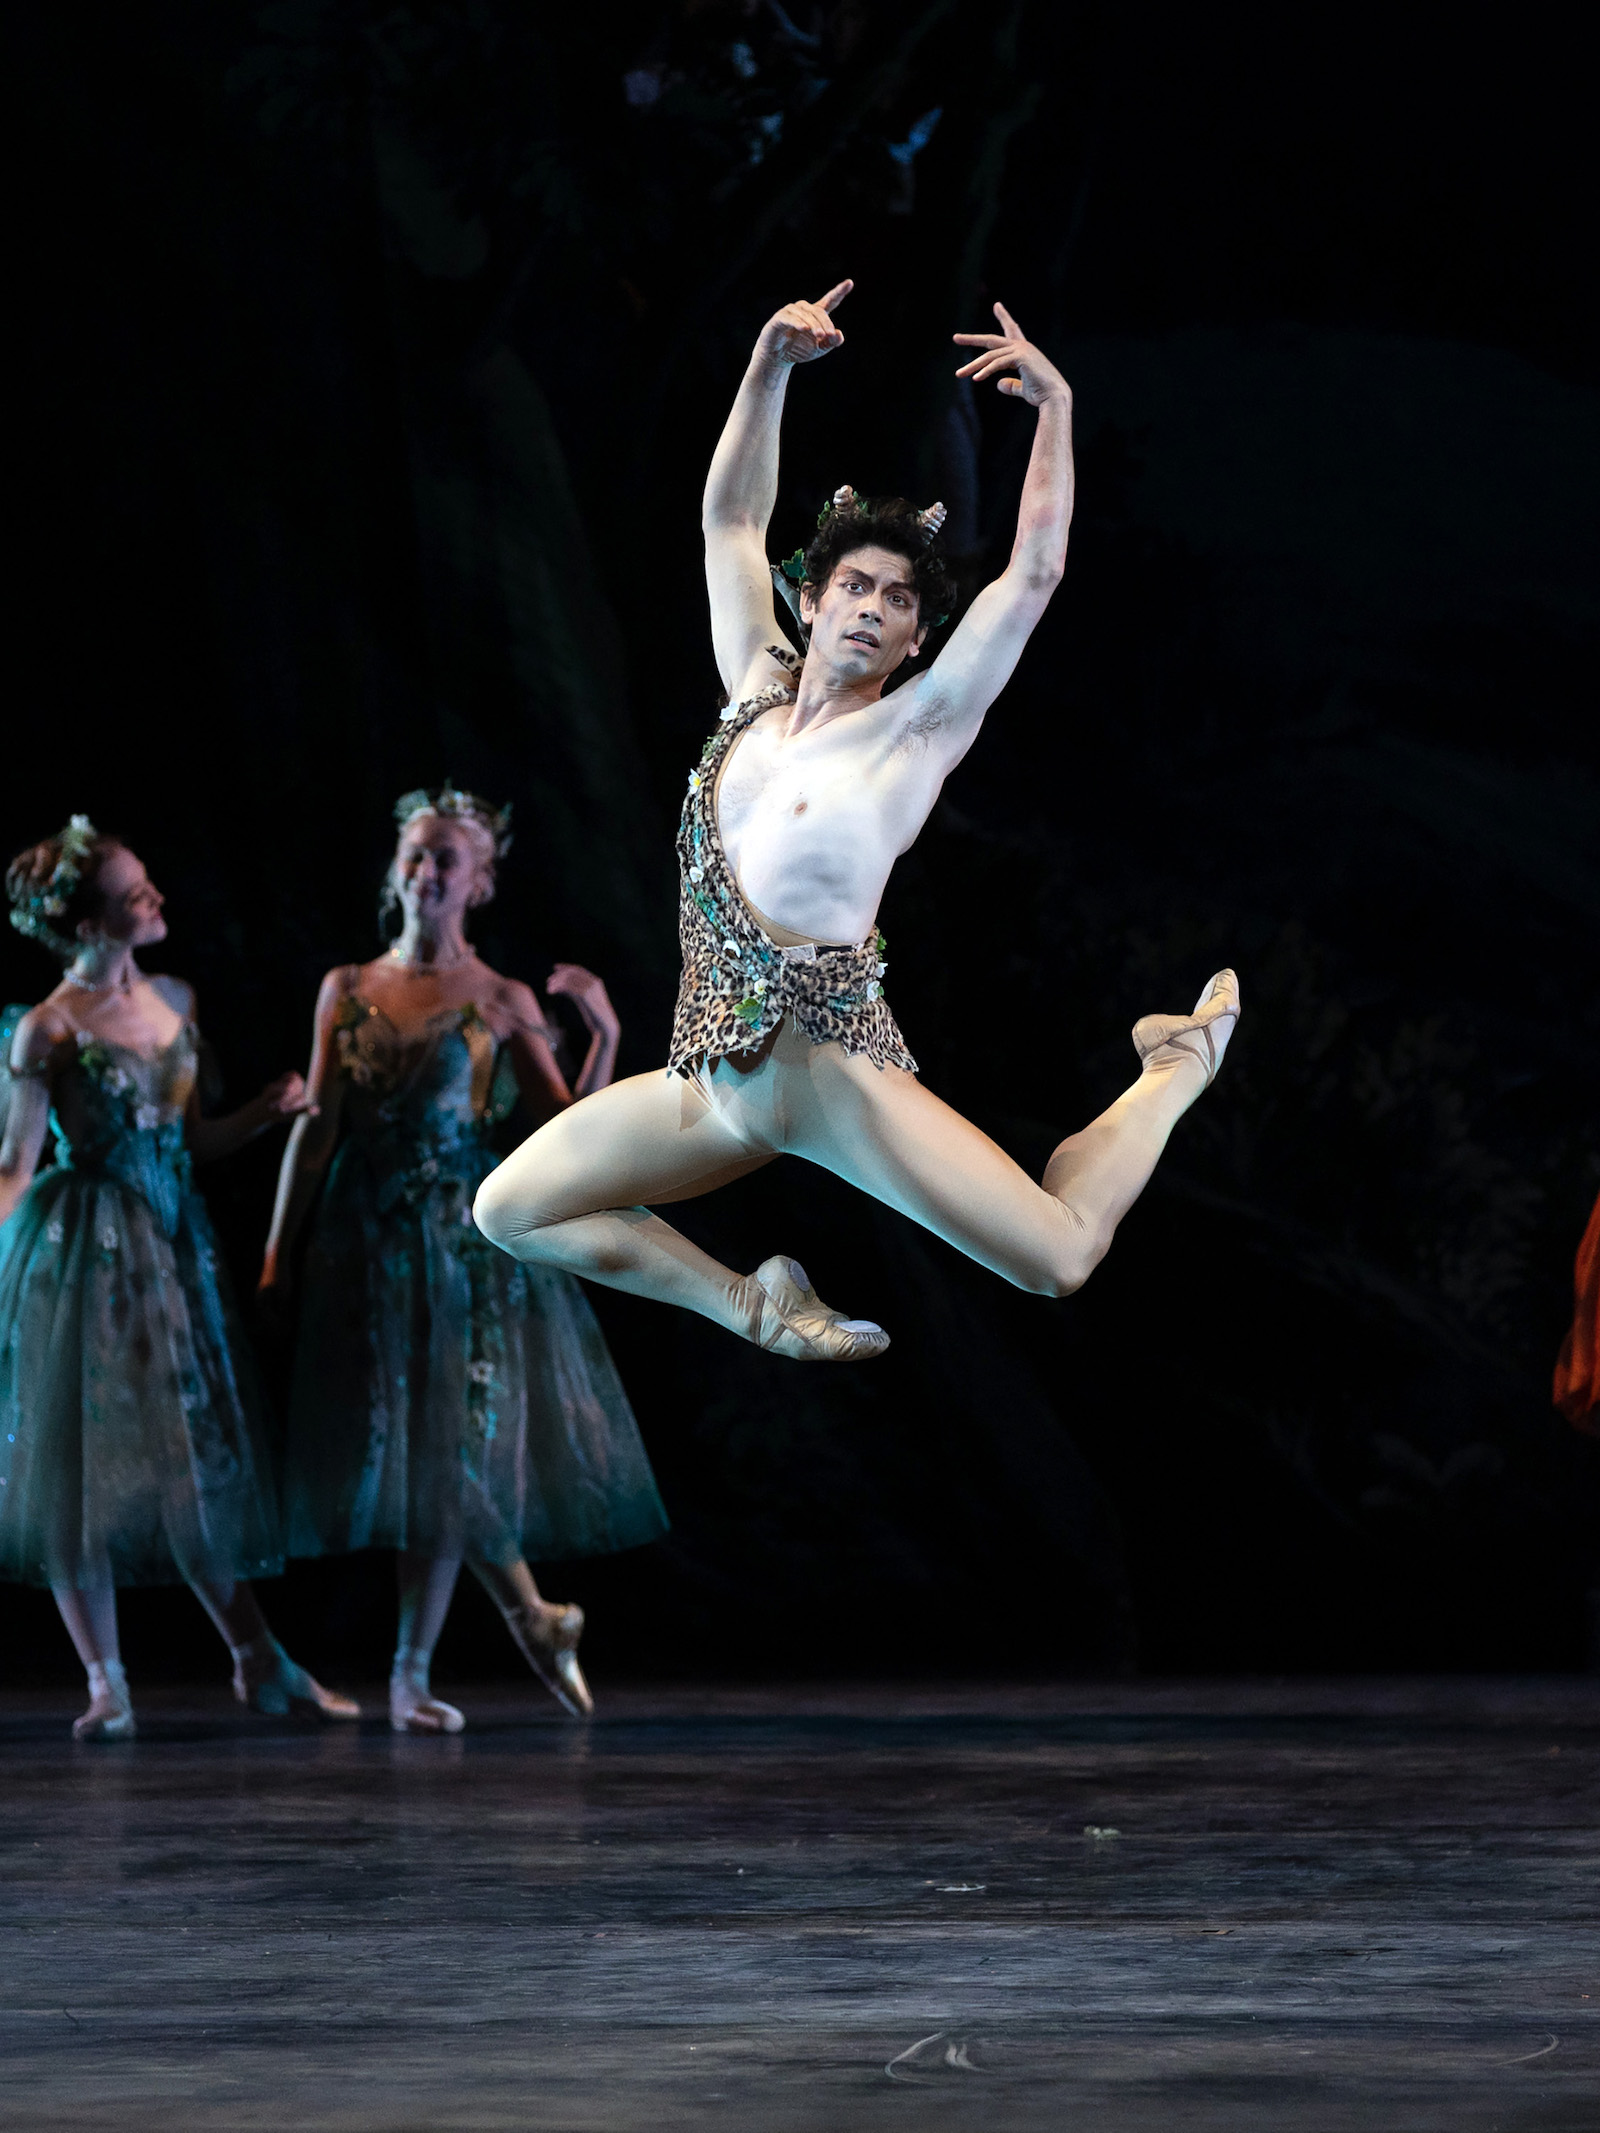 A ballet dancer leaping in midair